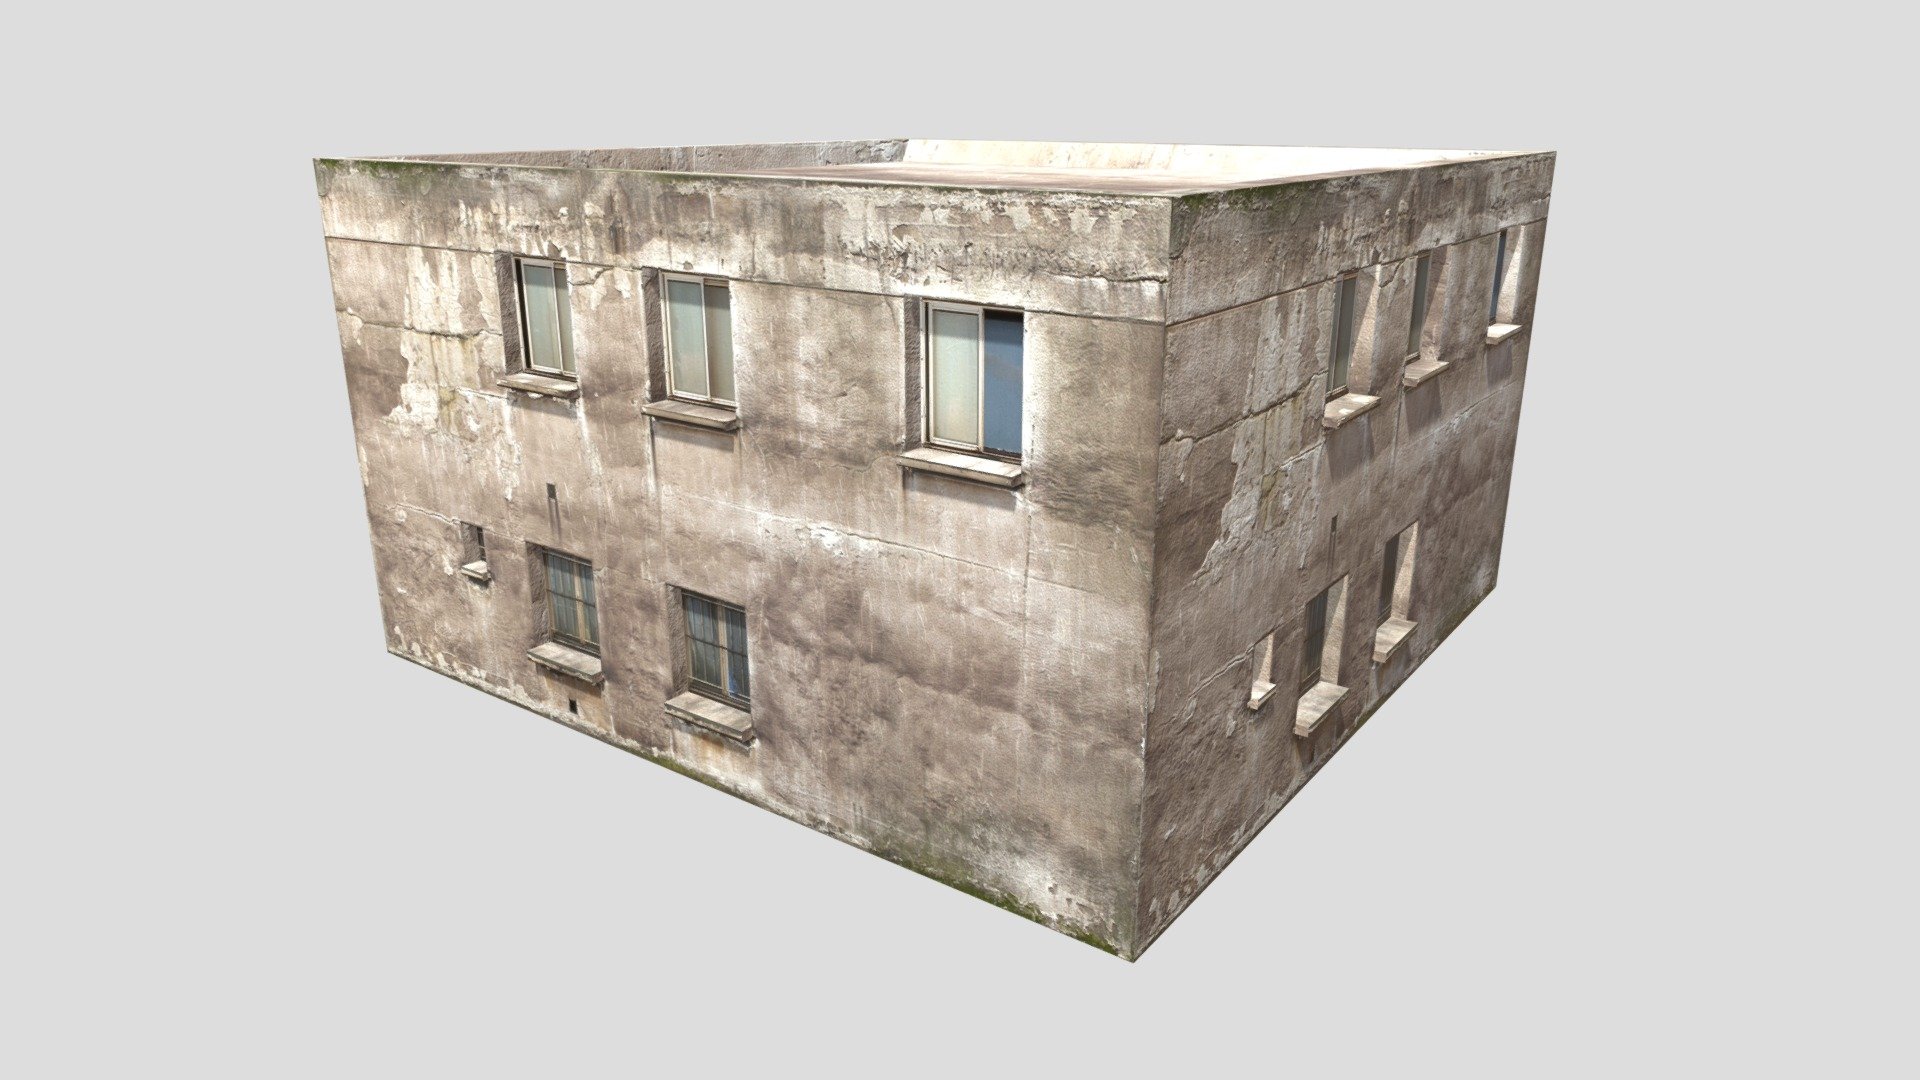 This lowpoly 3D model portrays an eerie and desolate old abandoned house that has long been abandoned, making it a perfect fit for games, animation, and other projects. The worn and weathered exterior of the house showcases crumbling brick walls, broken windows, and a dilapidated roof that has seen better days. This model has been meticulously designed to maintain visual quality while ensuring optimal performance for gaming and animation. The lowpoly model captures the essence of abandoned , allowing for immersive experiences in virtual environments that evoke a sense of mystery and exploration.

Includes




Blender Project

Cinema 4D Project

Tetures (1k and 2k)

Obj

Fbx

For Unreal Engine, Maya, 3D Max, Unity and more, you just need to import the obj or fbx and the texture :)

*One or more textures on this 3D model have been created with photographs from Textures.com. These photographs may not be redistributed by default; please visit www.textures.com for more information 3d model